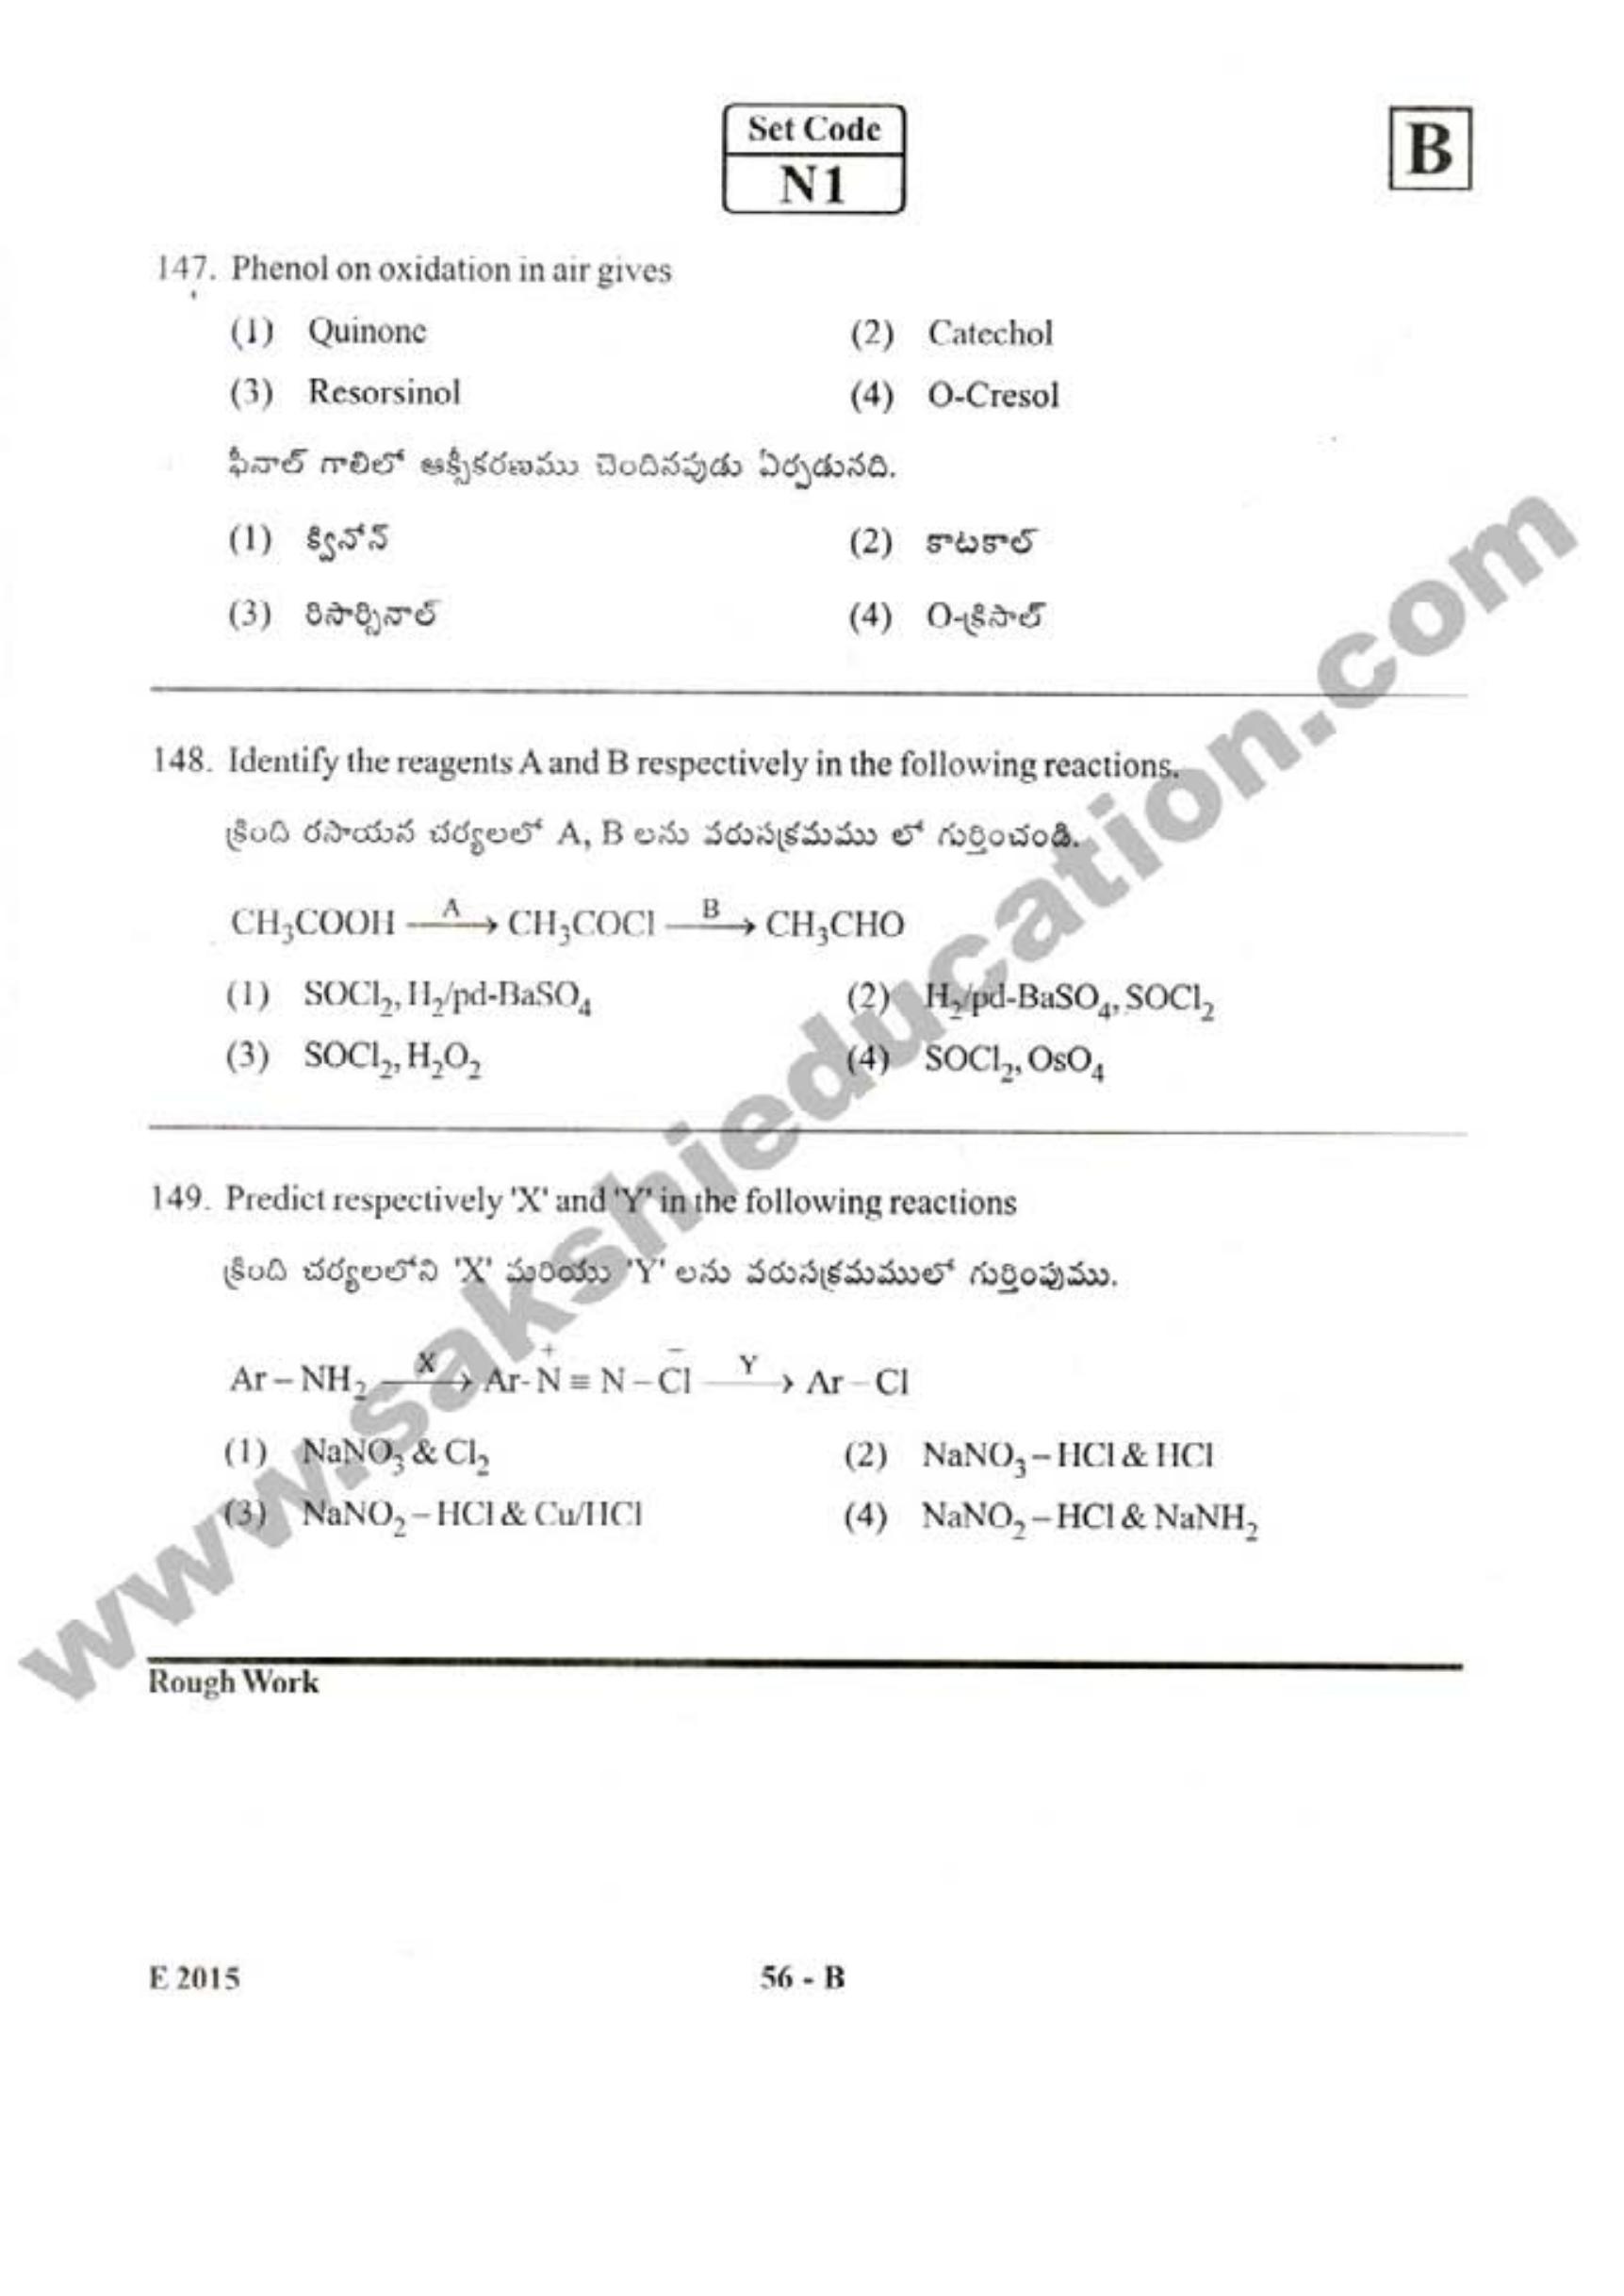 AP EAMCET 2015 Engineering Question Paper with Key - Page 55